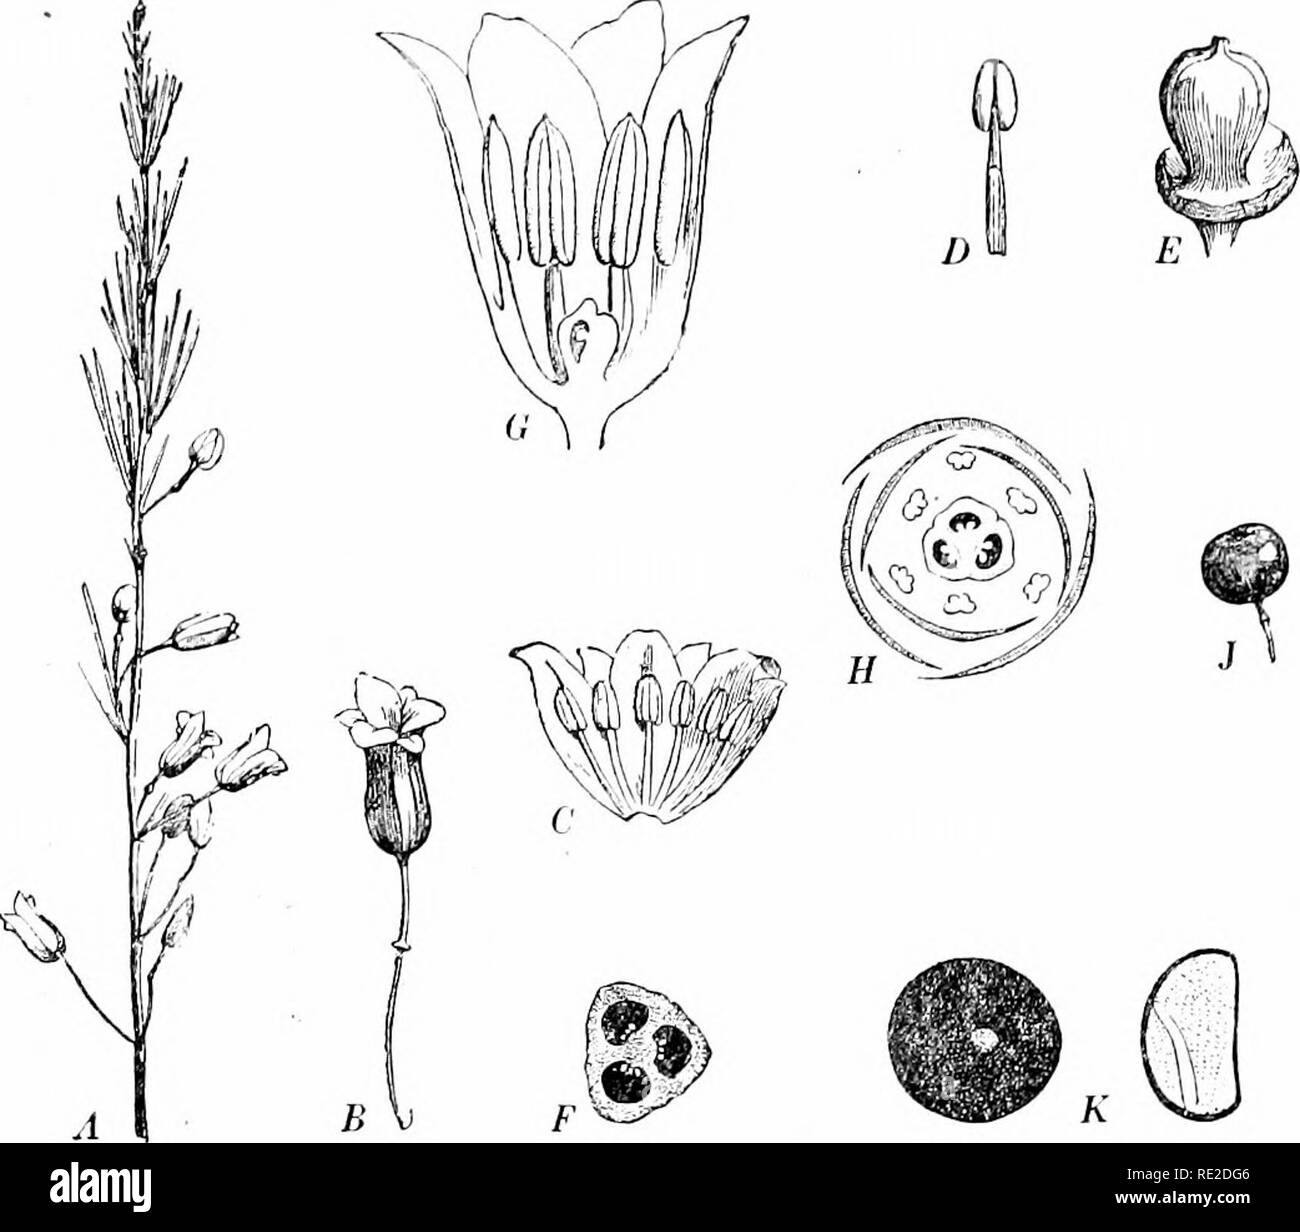 . Plants and their uses; an introduction to botany. Botany; Botany, Economic. HERB AG E-VE(! ETA BLES. Fig. 62, II.—Asparagus. .4, upper part of a flowering branch. X J. B, flower, enlarged. C, perianth and stamens of the same spread out. D, stamen, outer view. E, pistil. F, cross section of ovary. 6-', flower cut in half verticalh&quot;. H, Diagram showing the arrangement of the parts of the flow'er. ./, fruit, natural size. K, seed, enlarged, and in vertical section. (LeMaout and Decaisne.) The relatively large proportion of mineral matter in the dry substance, ?'. c, the entire substance fr Stock Photo